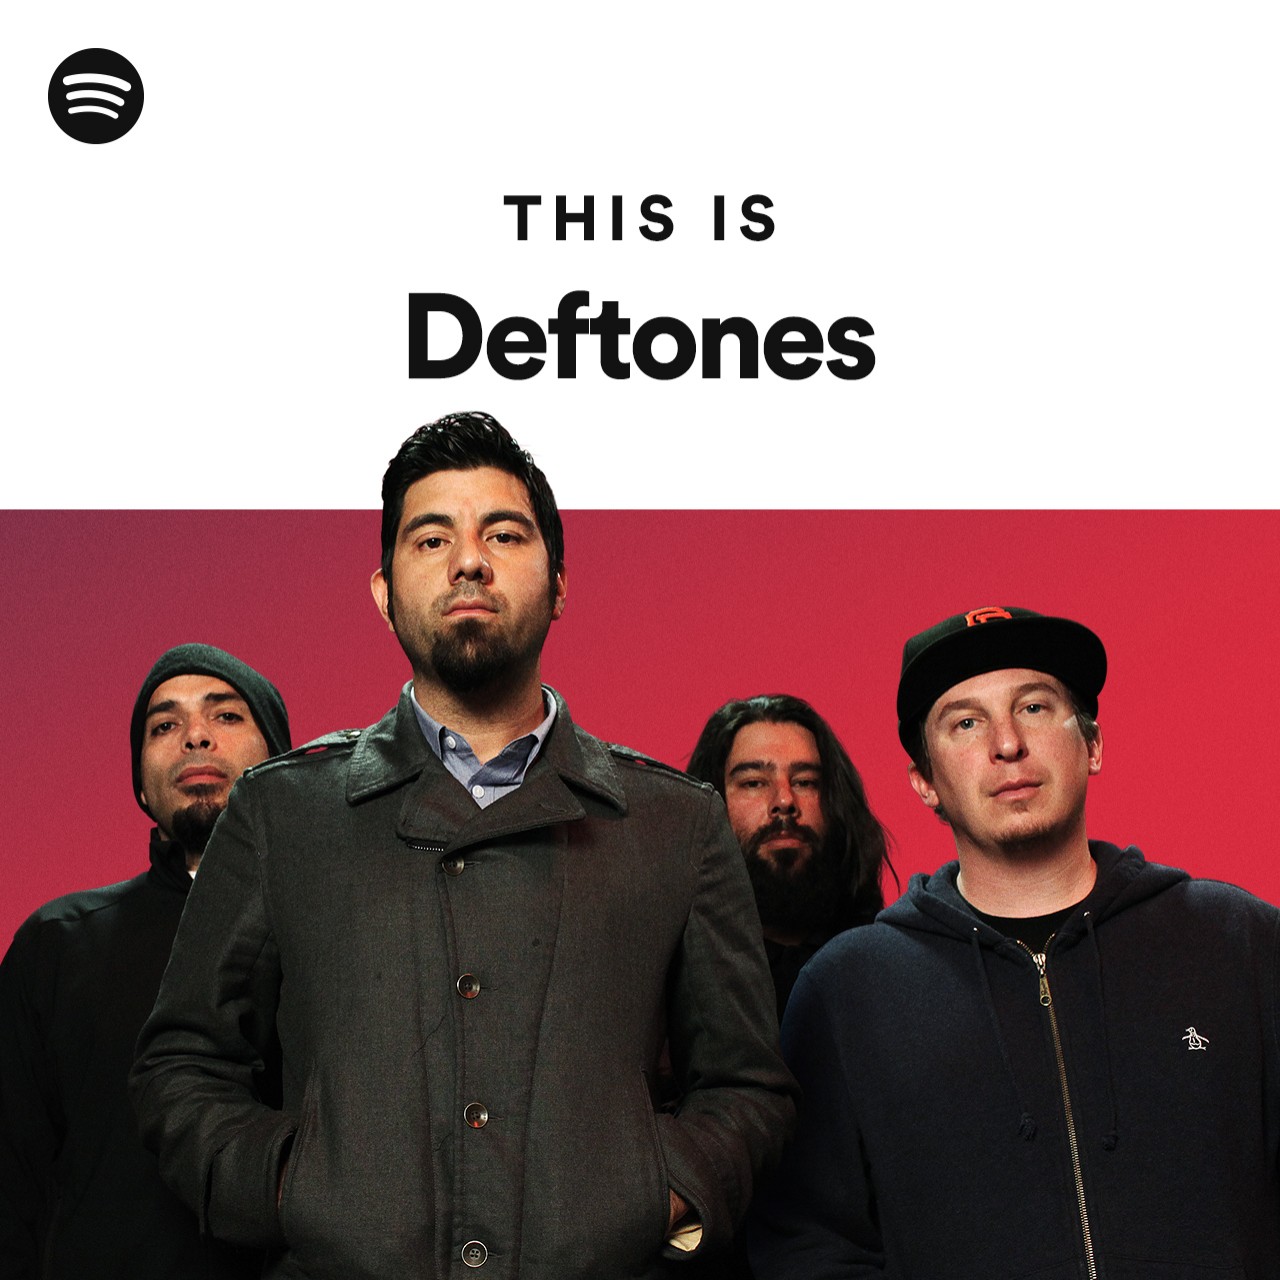 This Is Deftones Spotify Playlist